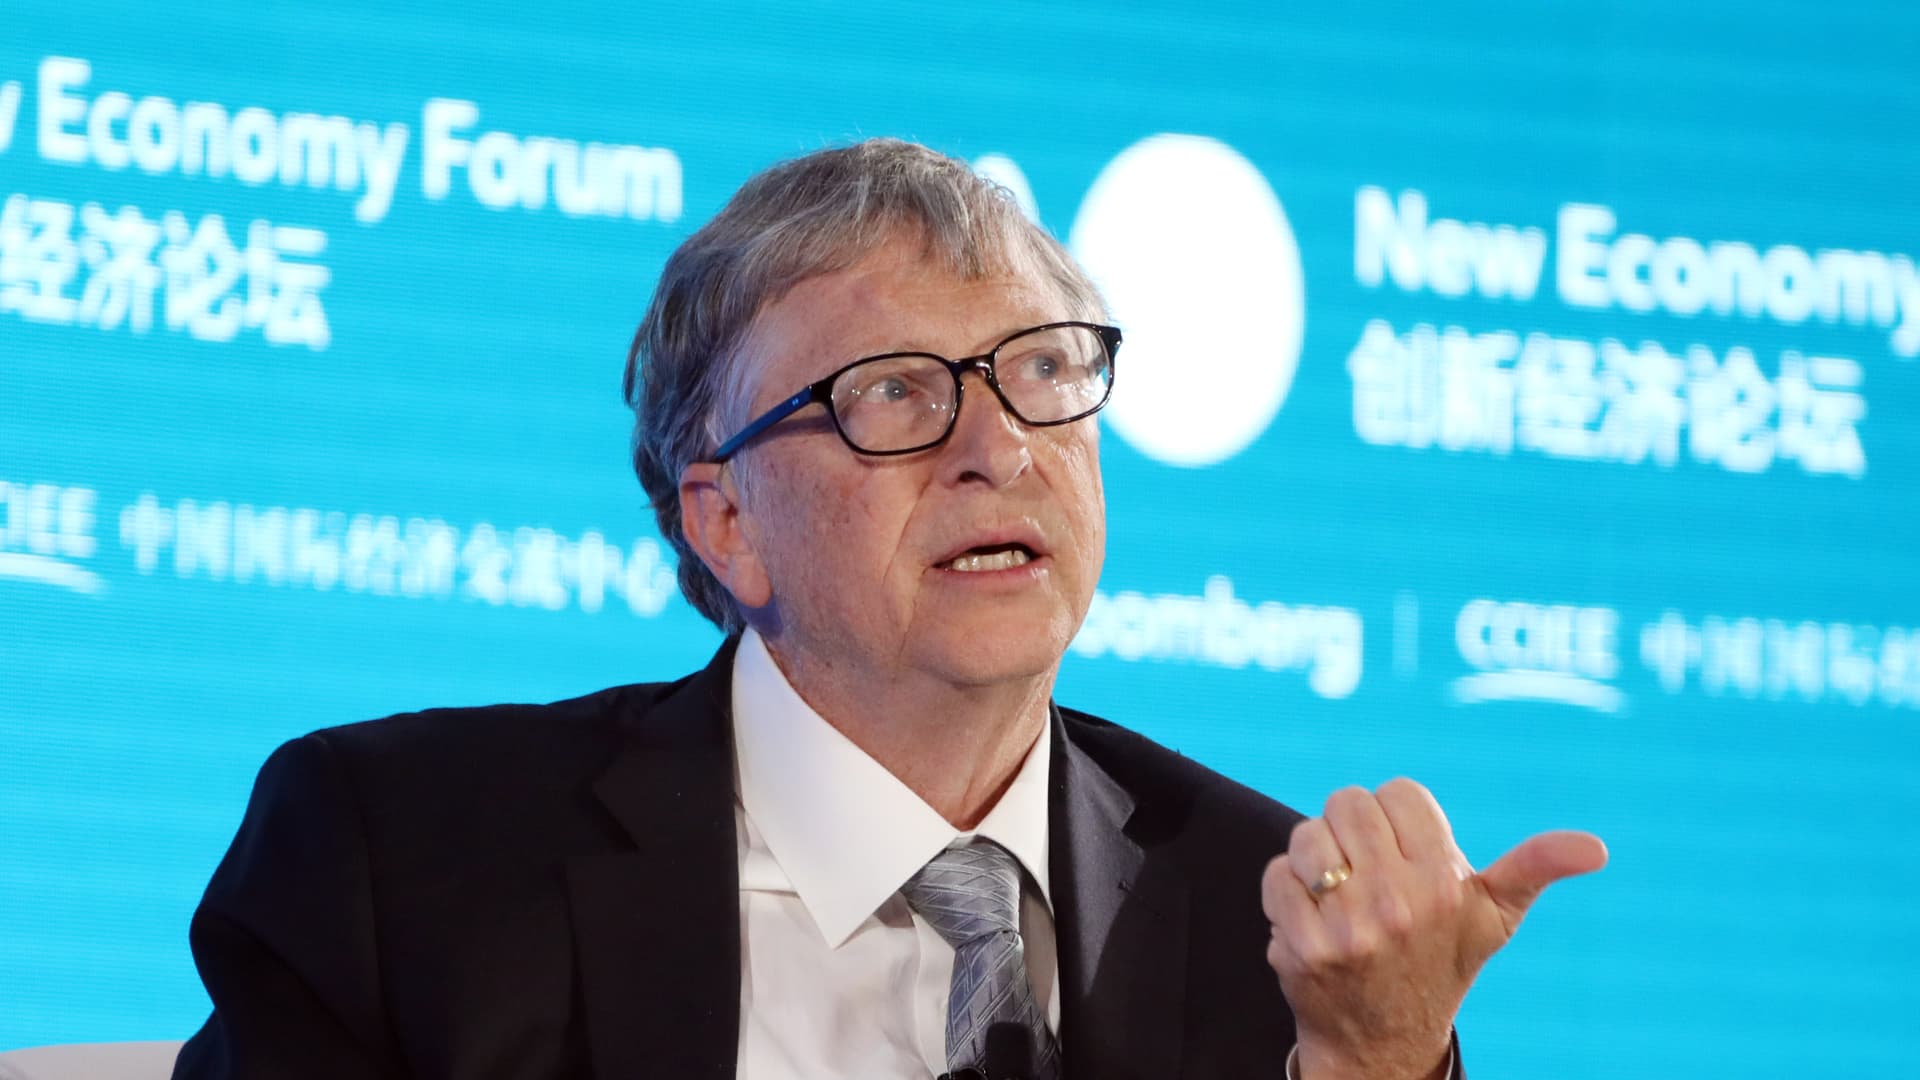 Bill Gates, co-chair of the Bill and Melinda Gates Foundation, speaks during the Bloomberg New Economy Forum in Beijing, China, on Thursday, Nov. 21, 2019.